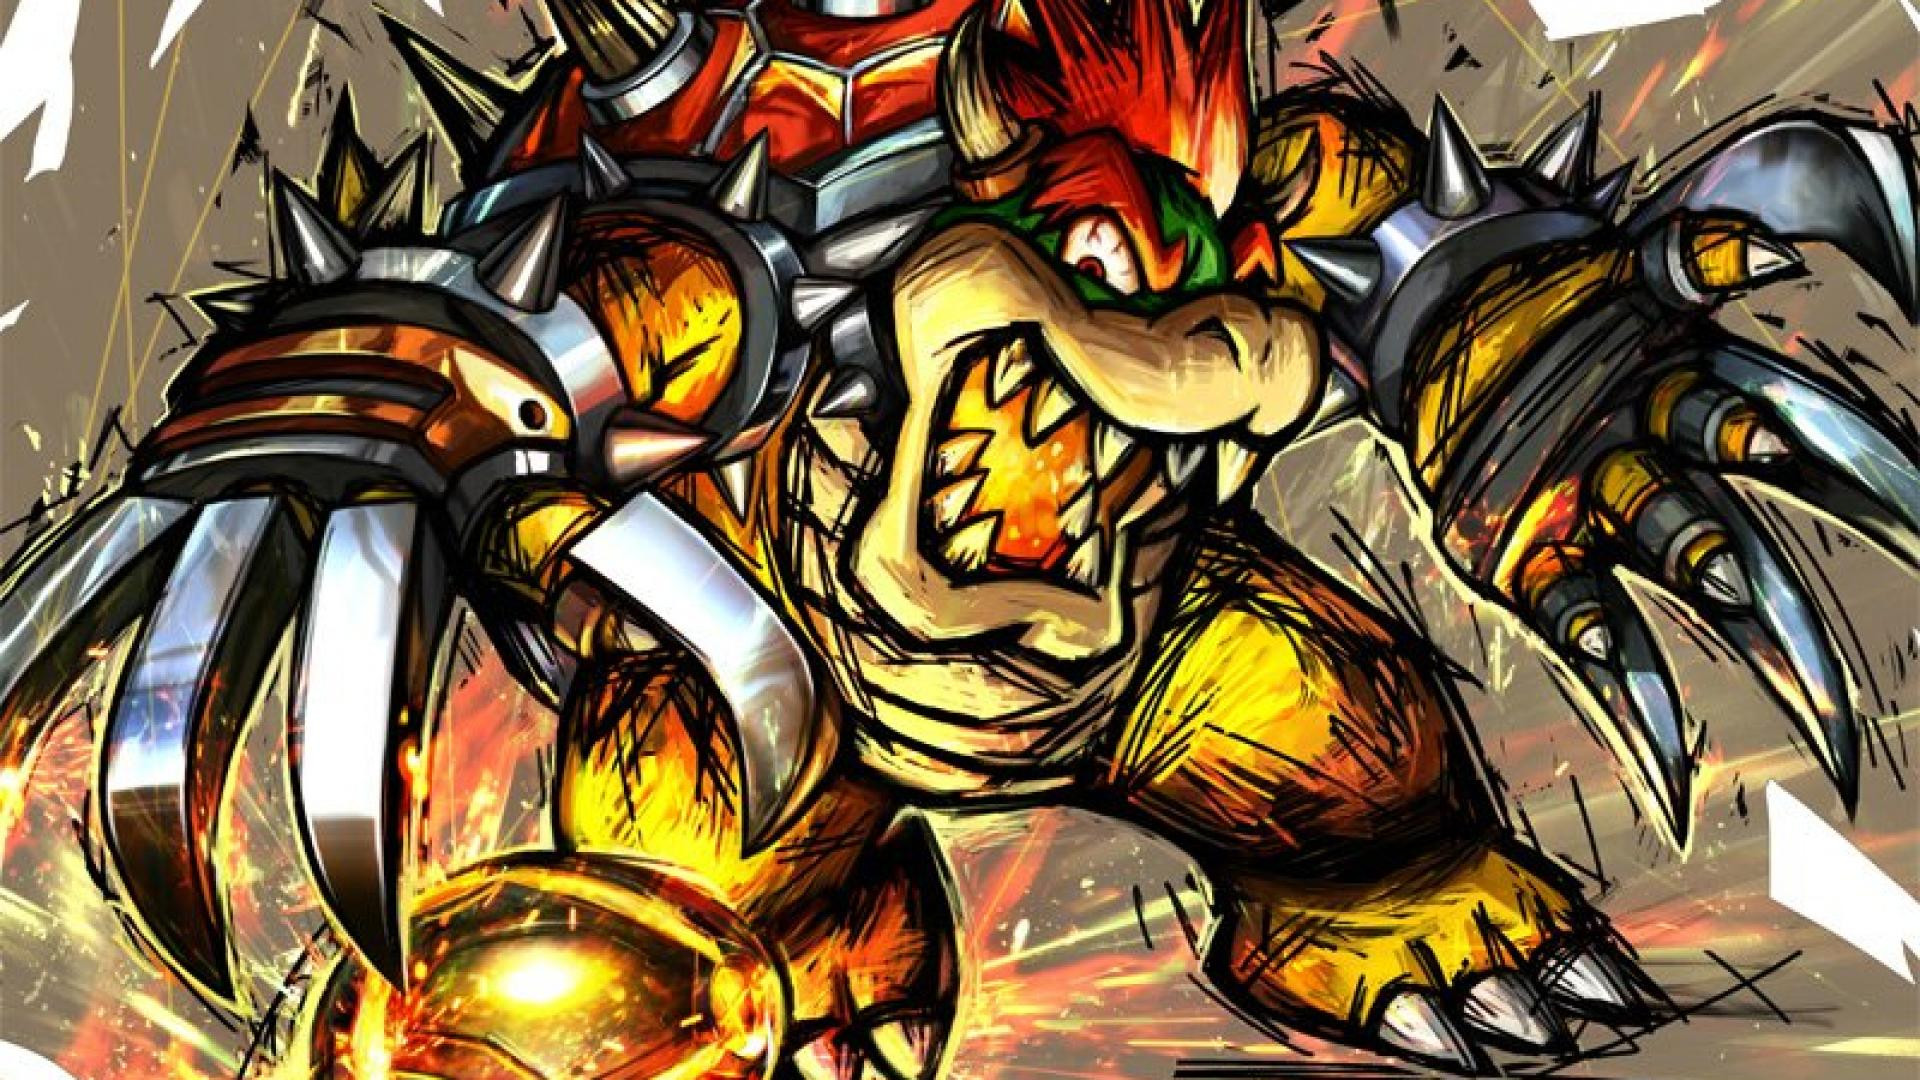 1920x1080 Super Mario Bros. images Bowser HD wallpaper and background photos